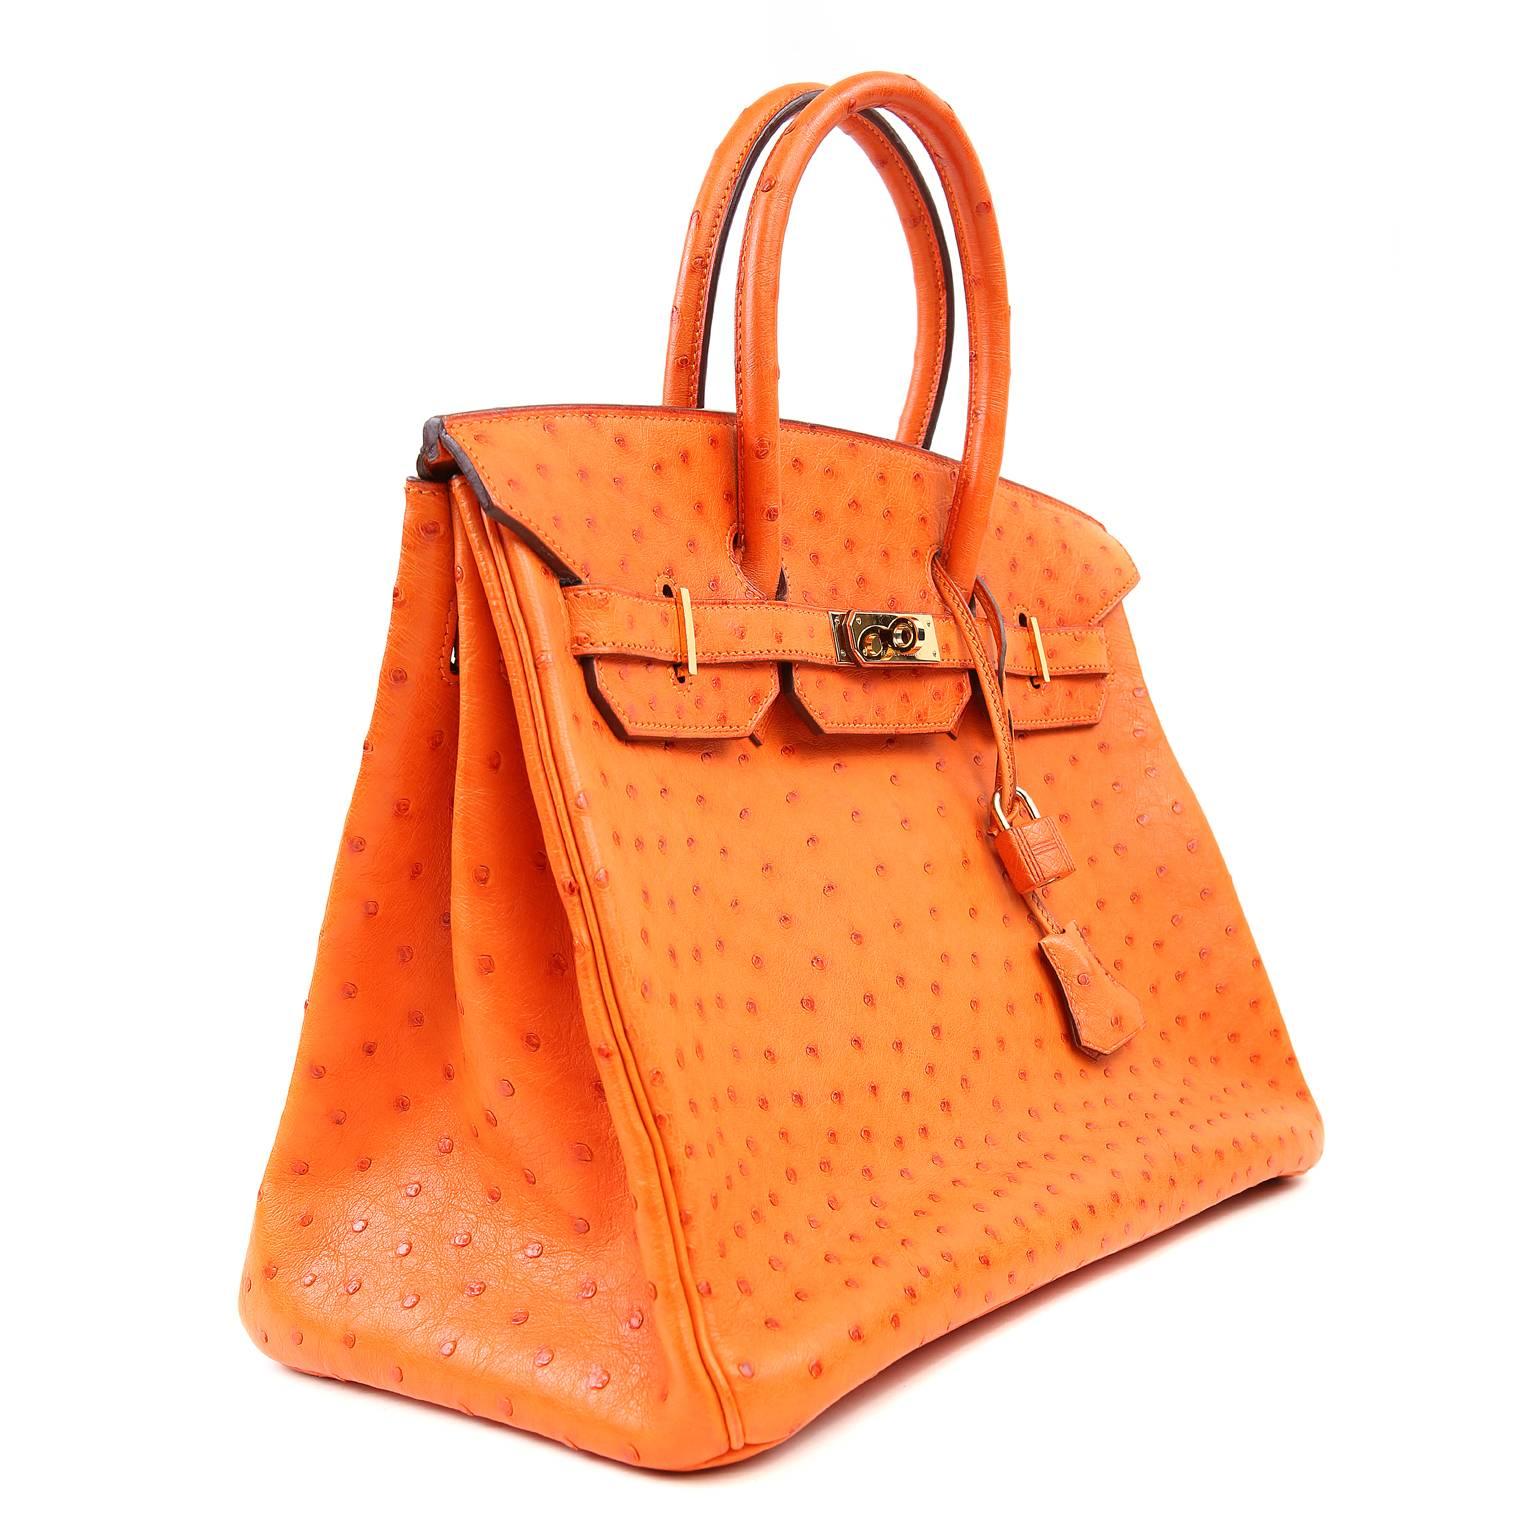 Hermès Orange Ostrich 35 cm  Birkin- Prisitne;  appears never  carried.  

  Hermès bags are considered the ultimate luxury item the world over.  Hand stitched by skilled craftsmen with extensive waitlists.  This particular Birkin is in exotic